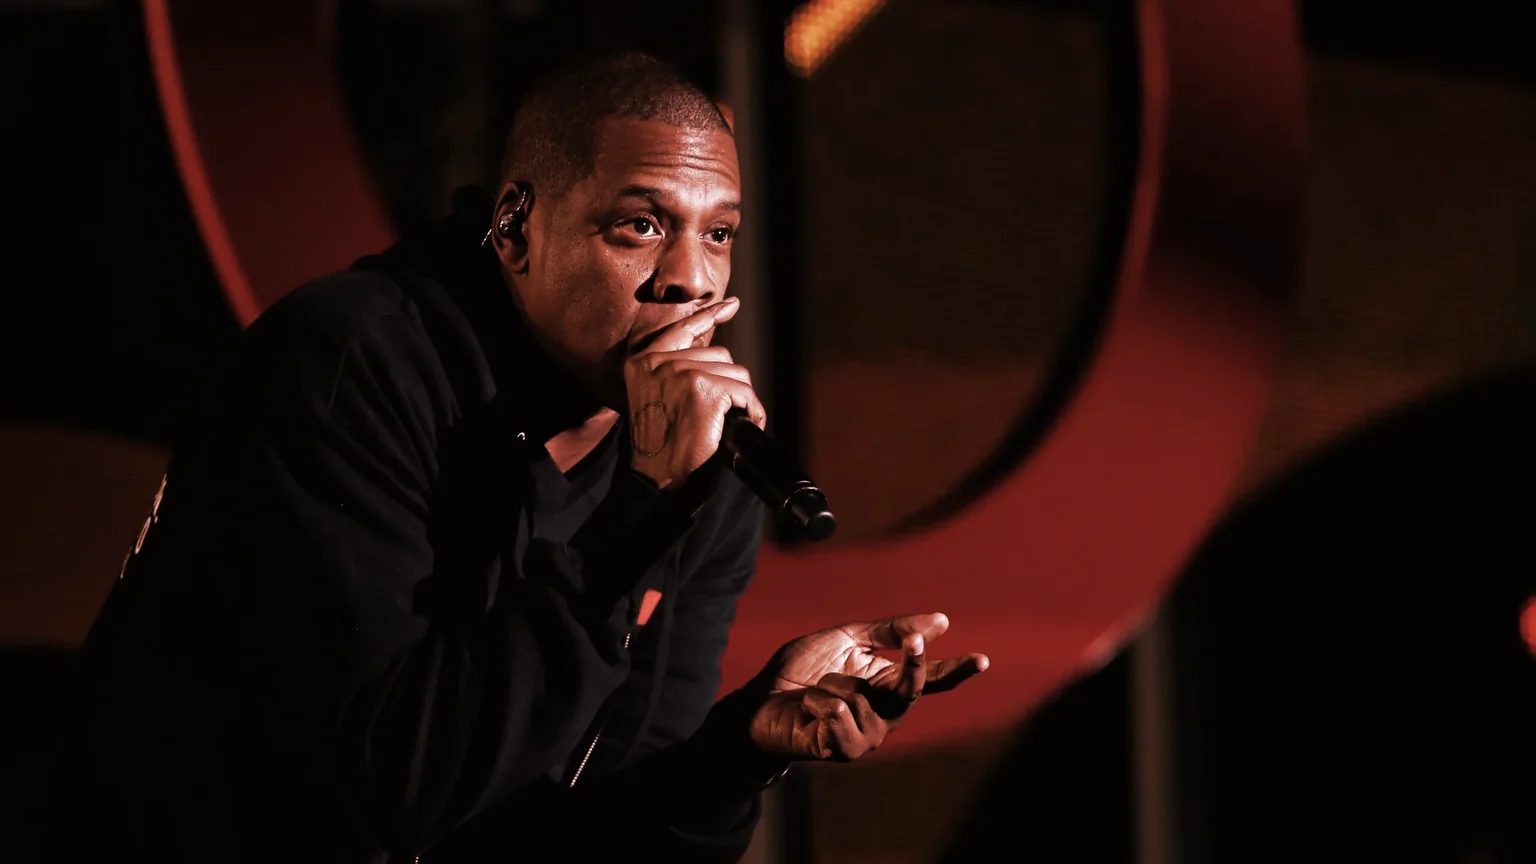 Jay-Z cofounded Roc-A-Fella Records. Image: Shutterstock